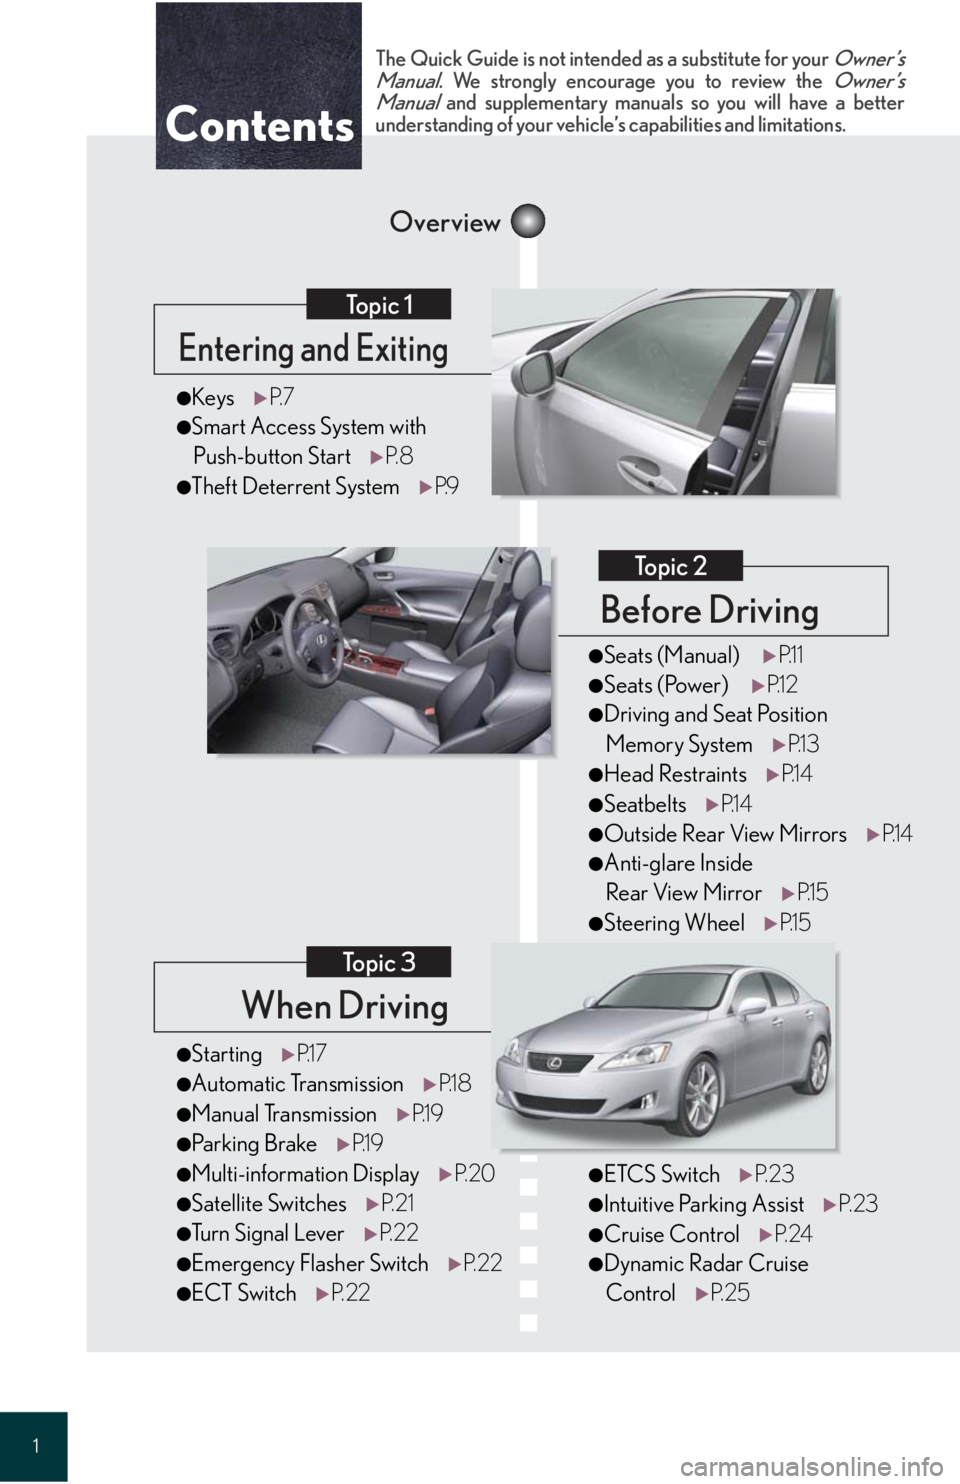 Lexus IS250 2008  Safety information / LEXUS 2008 IS 350/250 QUICK GUIDE OWNERS MANUAL (OM60D81U) 1
When Driving
Topic 3
Entering and Exiting
Topic 1
Before Driving
Topic 2
Overview
Contents
●StartingP.1 7
●Automatic Transmission P.1 8
●Manual TransmissionP.1 9
●Parking BrakeP.1 9
●Multi